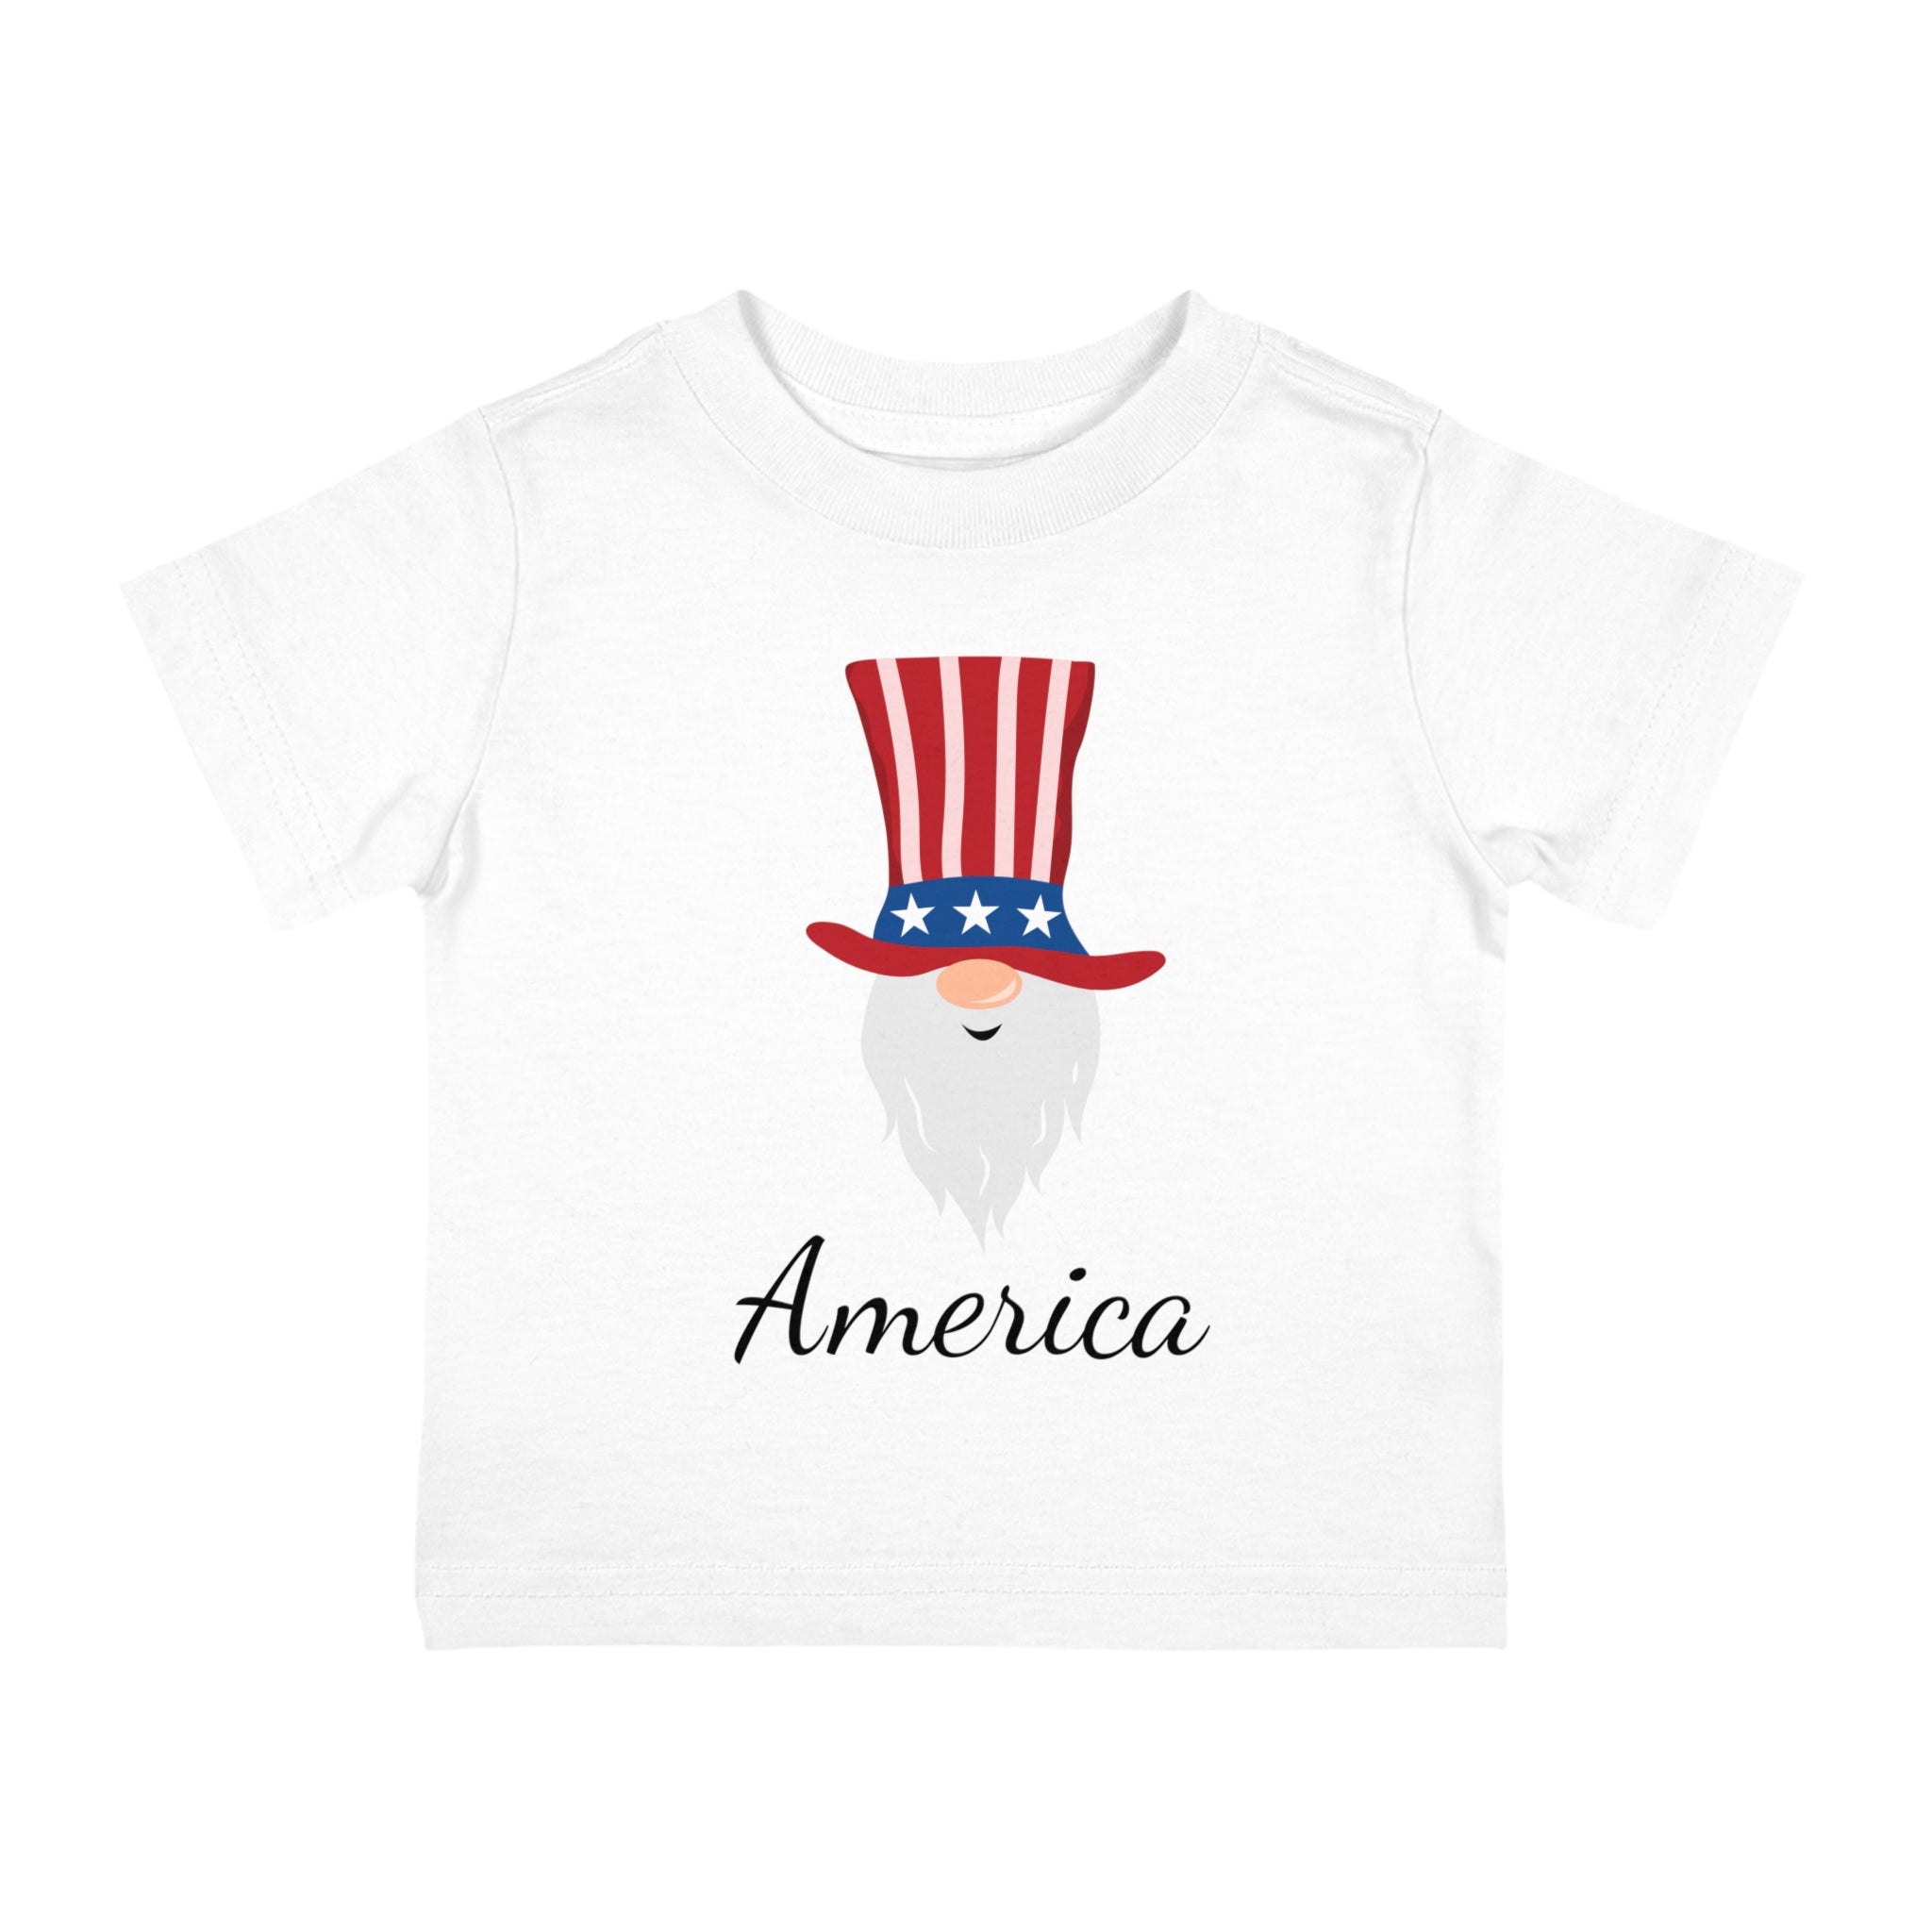 America Design Gnome Infant Shirt, Baby Tee, Infant Tee